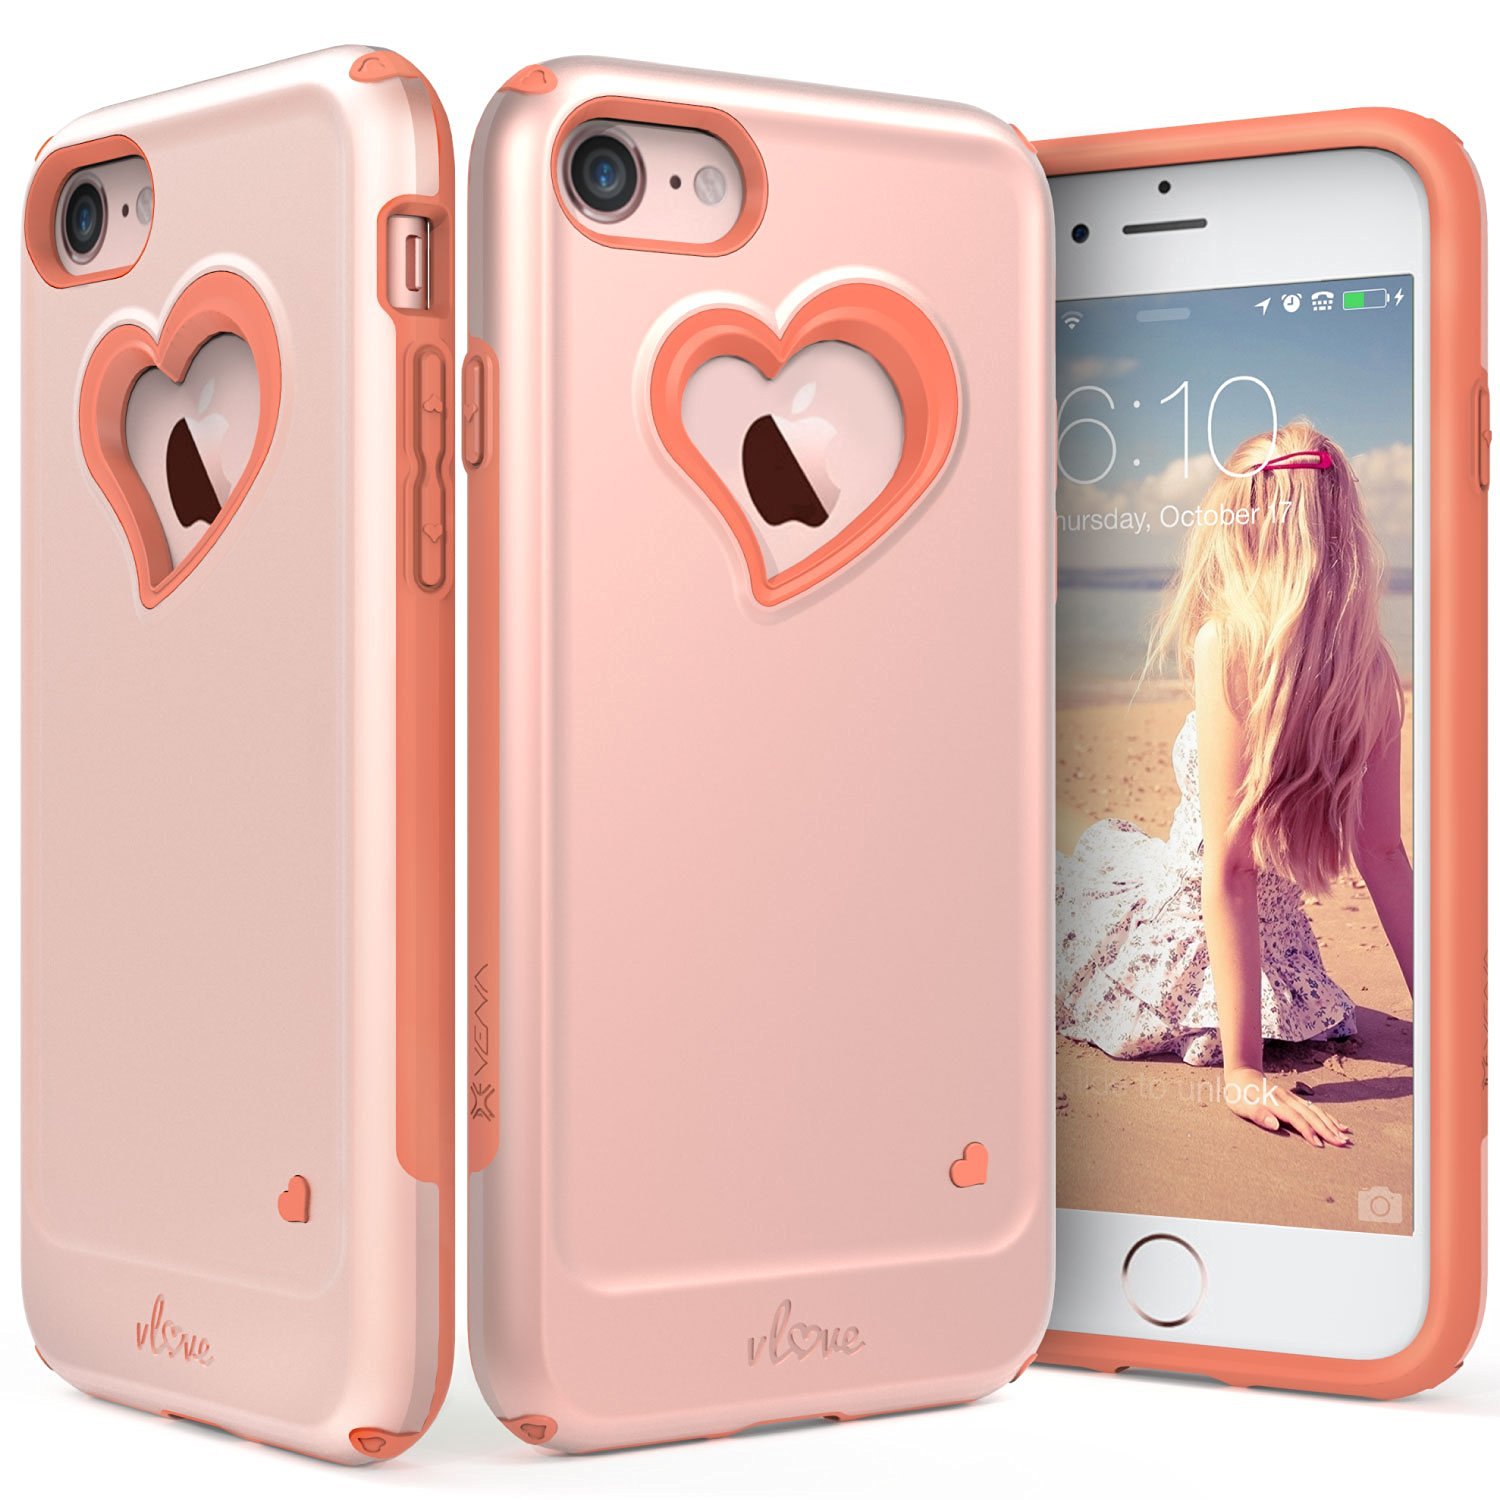 10 Adorable iPhone 7 Cases to Show Off Your Style and Protect Your Device!